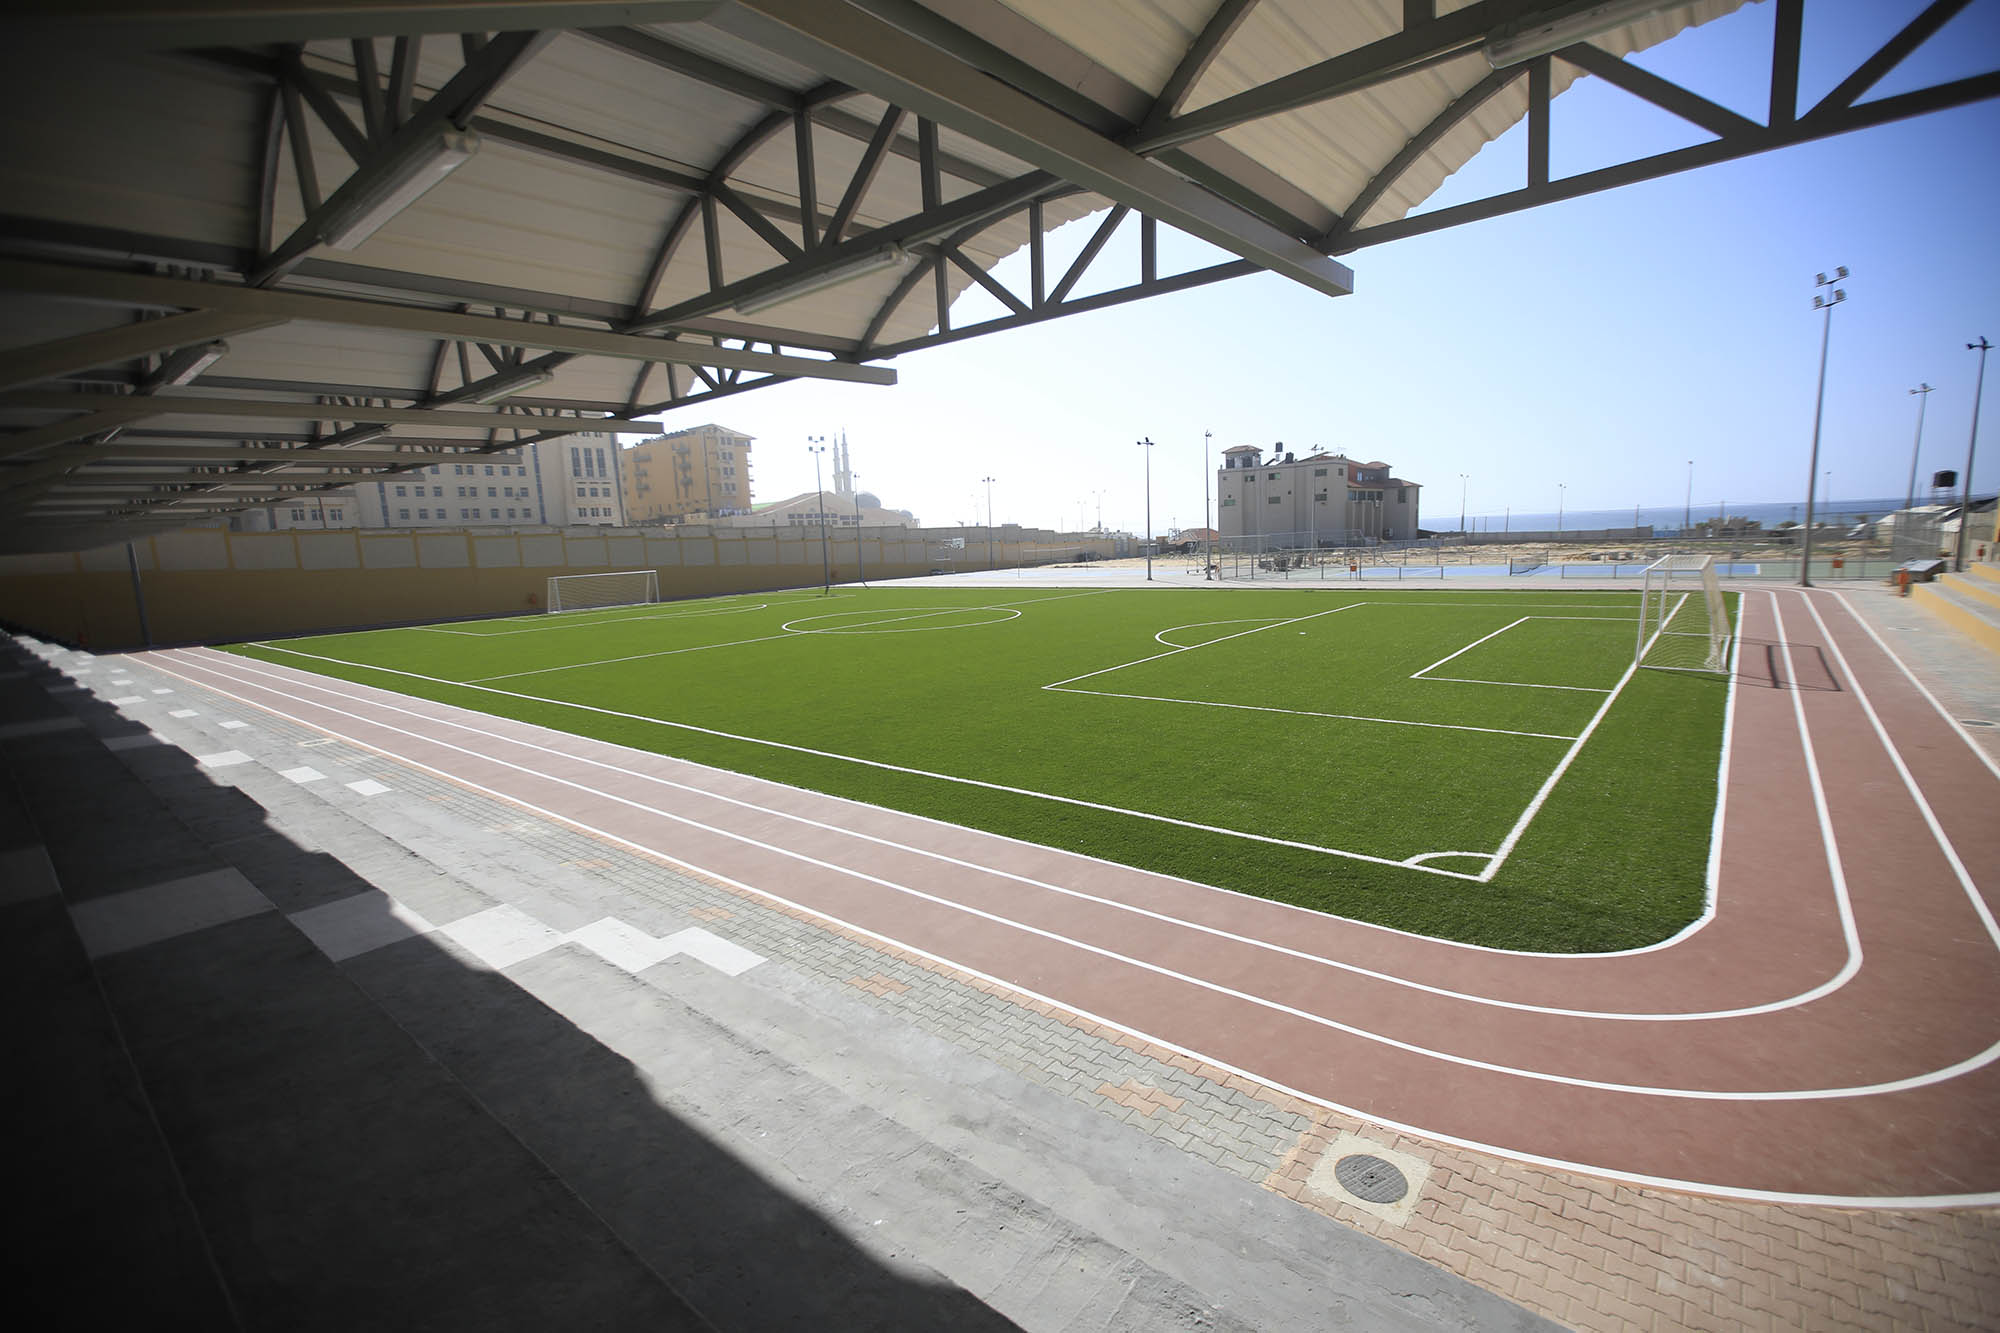 The track and stadium seating around the football field at the Gaza sports club.